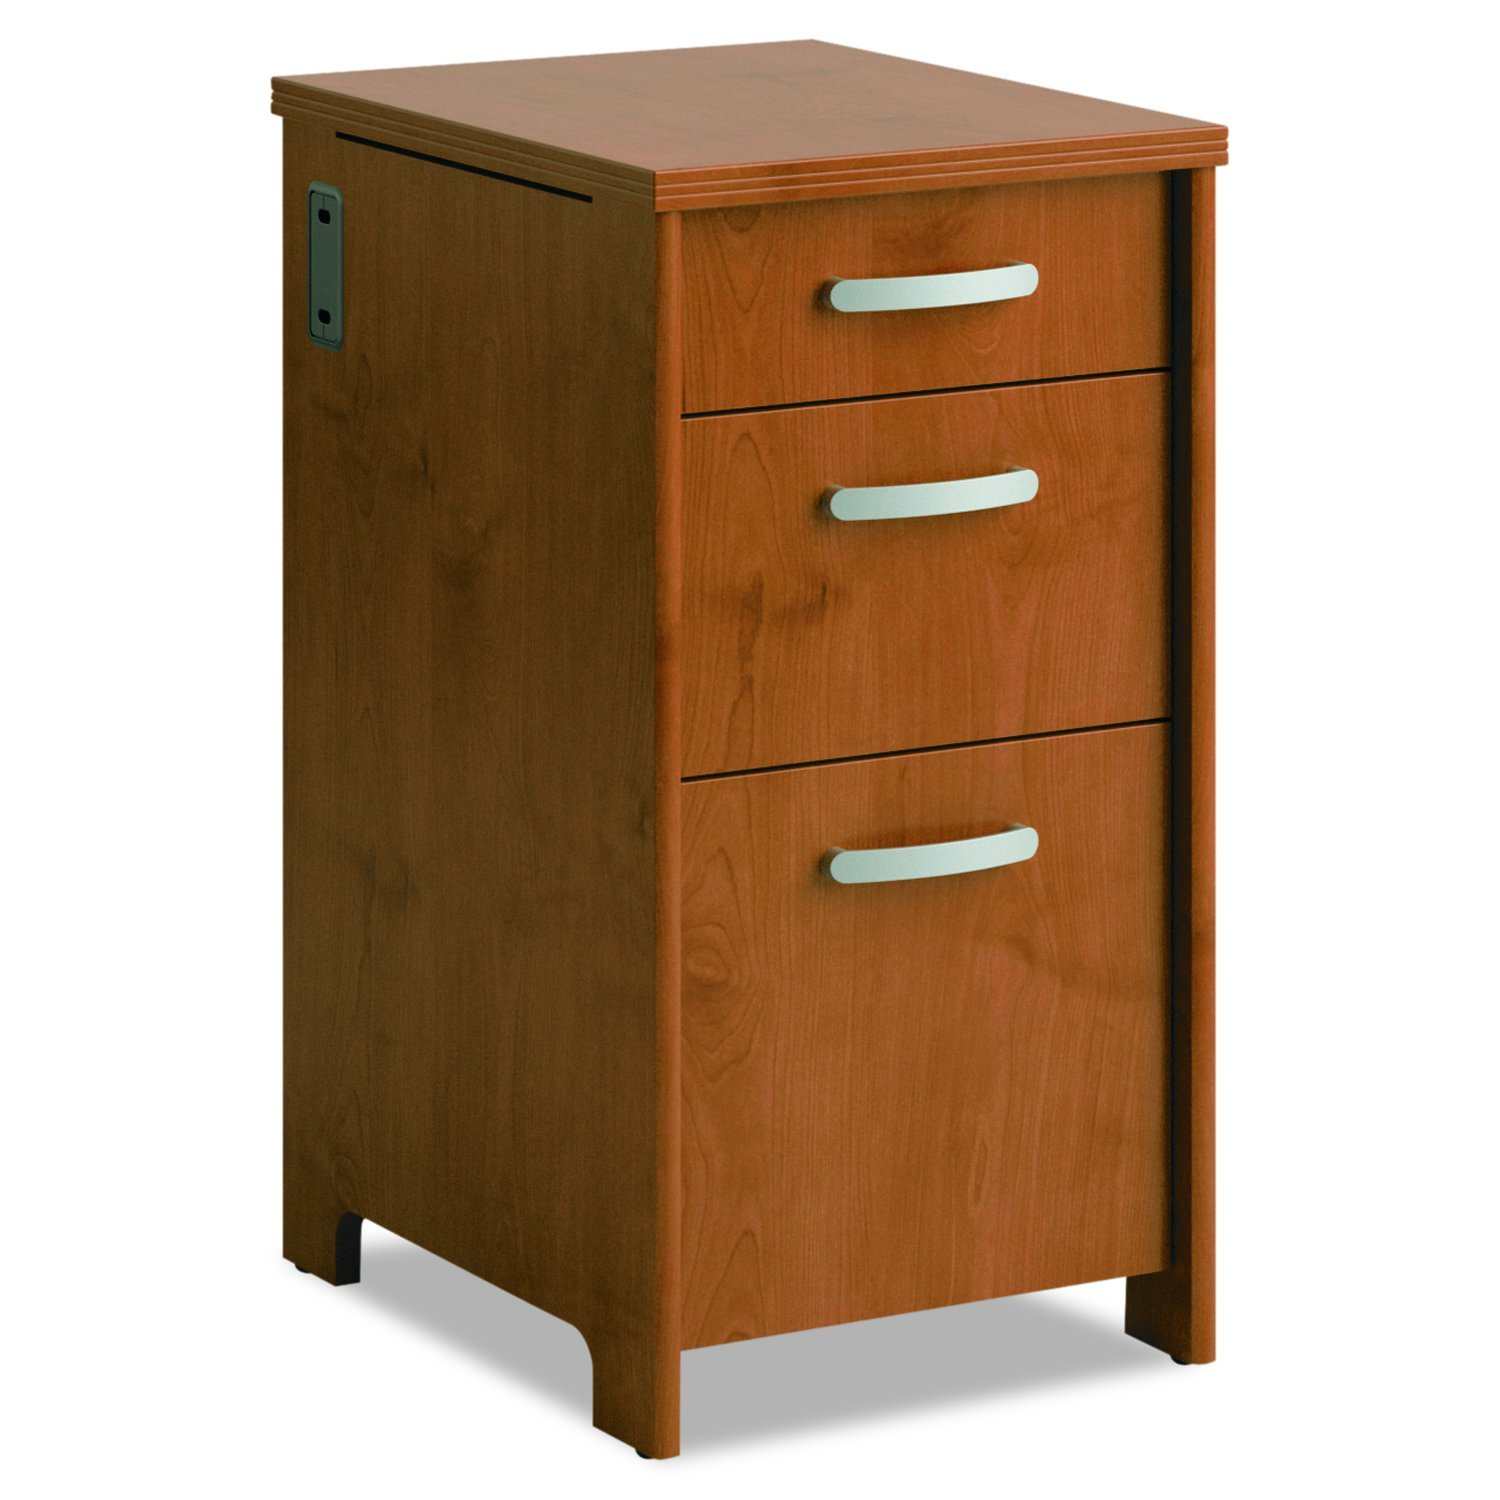 Top 20 Wooden File Cabinets With Drawers intended for size 1500 X 1500